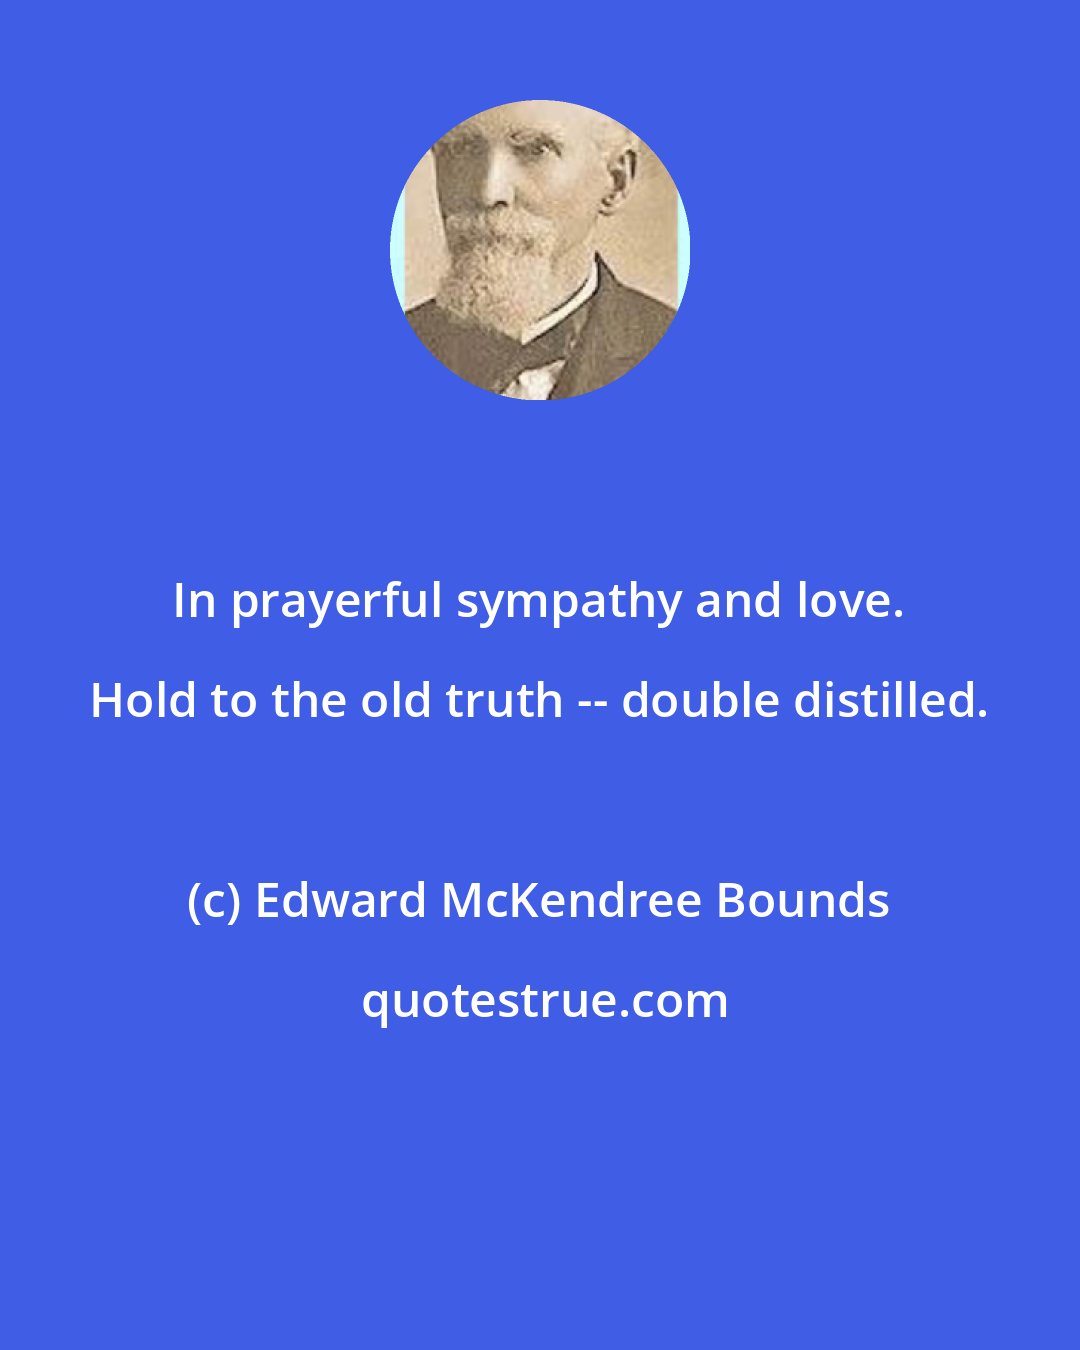 Edward McKendree Bounds: In prayerful sympathy and love. Hold to the old truth -- double distilled.